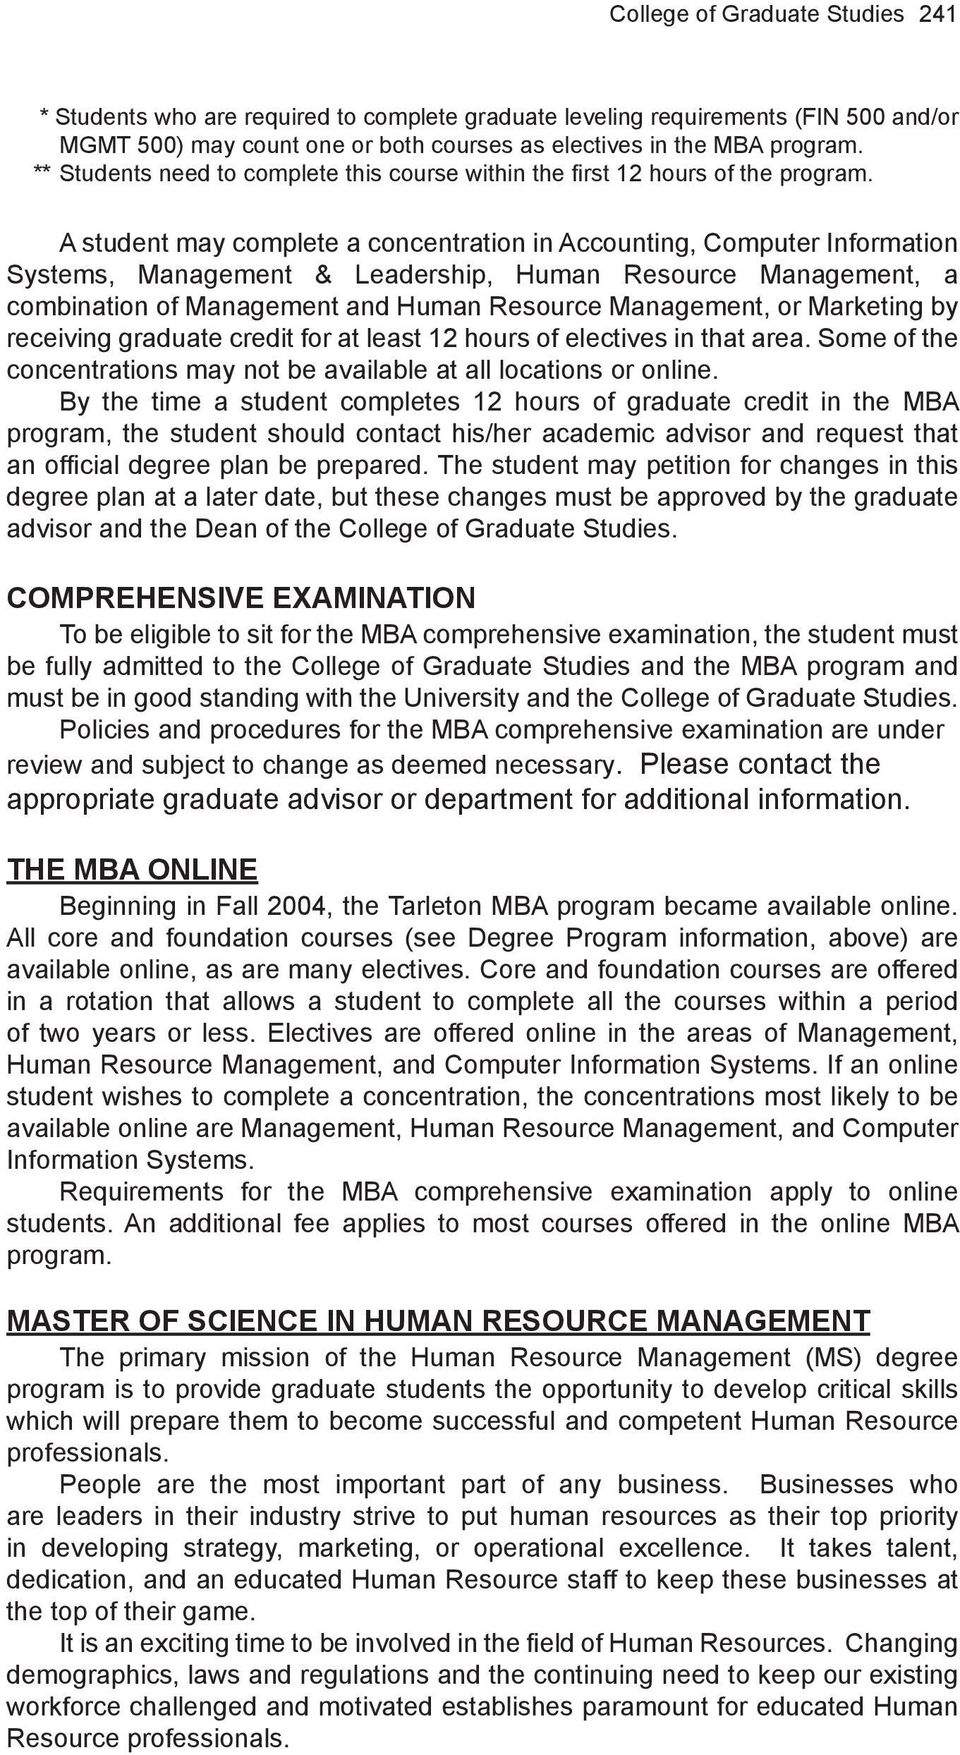 A student may complete a concentration in Accounting, Computer Information Systems, Management & Leadership, Human Resource Management, a combination of Management and Human Resource Management, or